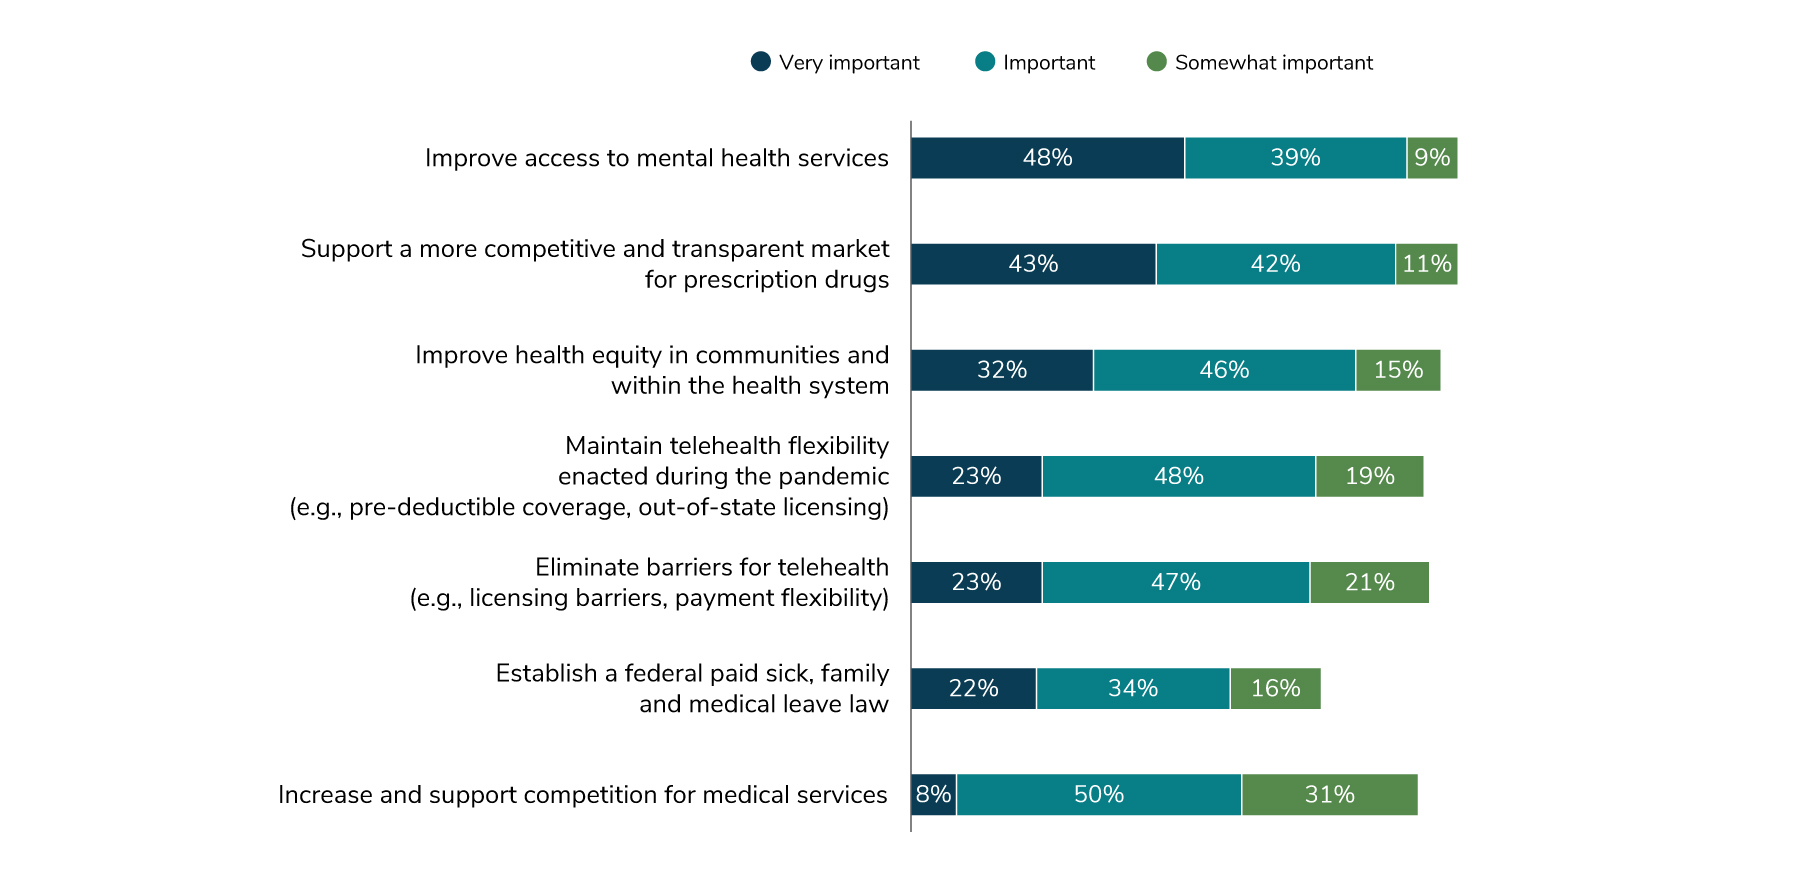 96% of employers believe that it is at least somewhat important that Congress enact legislation that improves access to mental health services. 96% believe that is at least somewhat important that legislation supports a more competitive and transparent market for prescription drugs. 93% believe that is at least somewhat important that legislation improve health equity in communities.